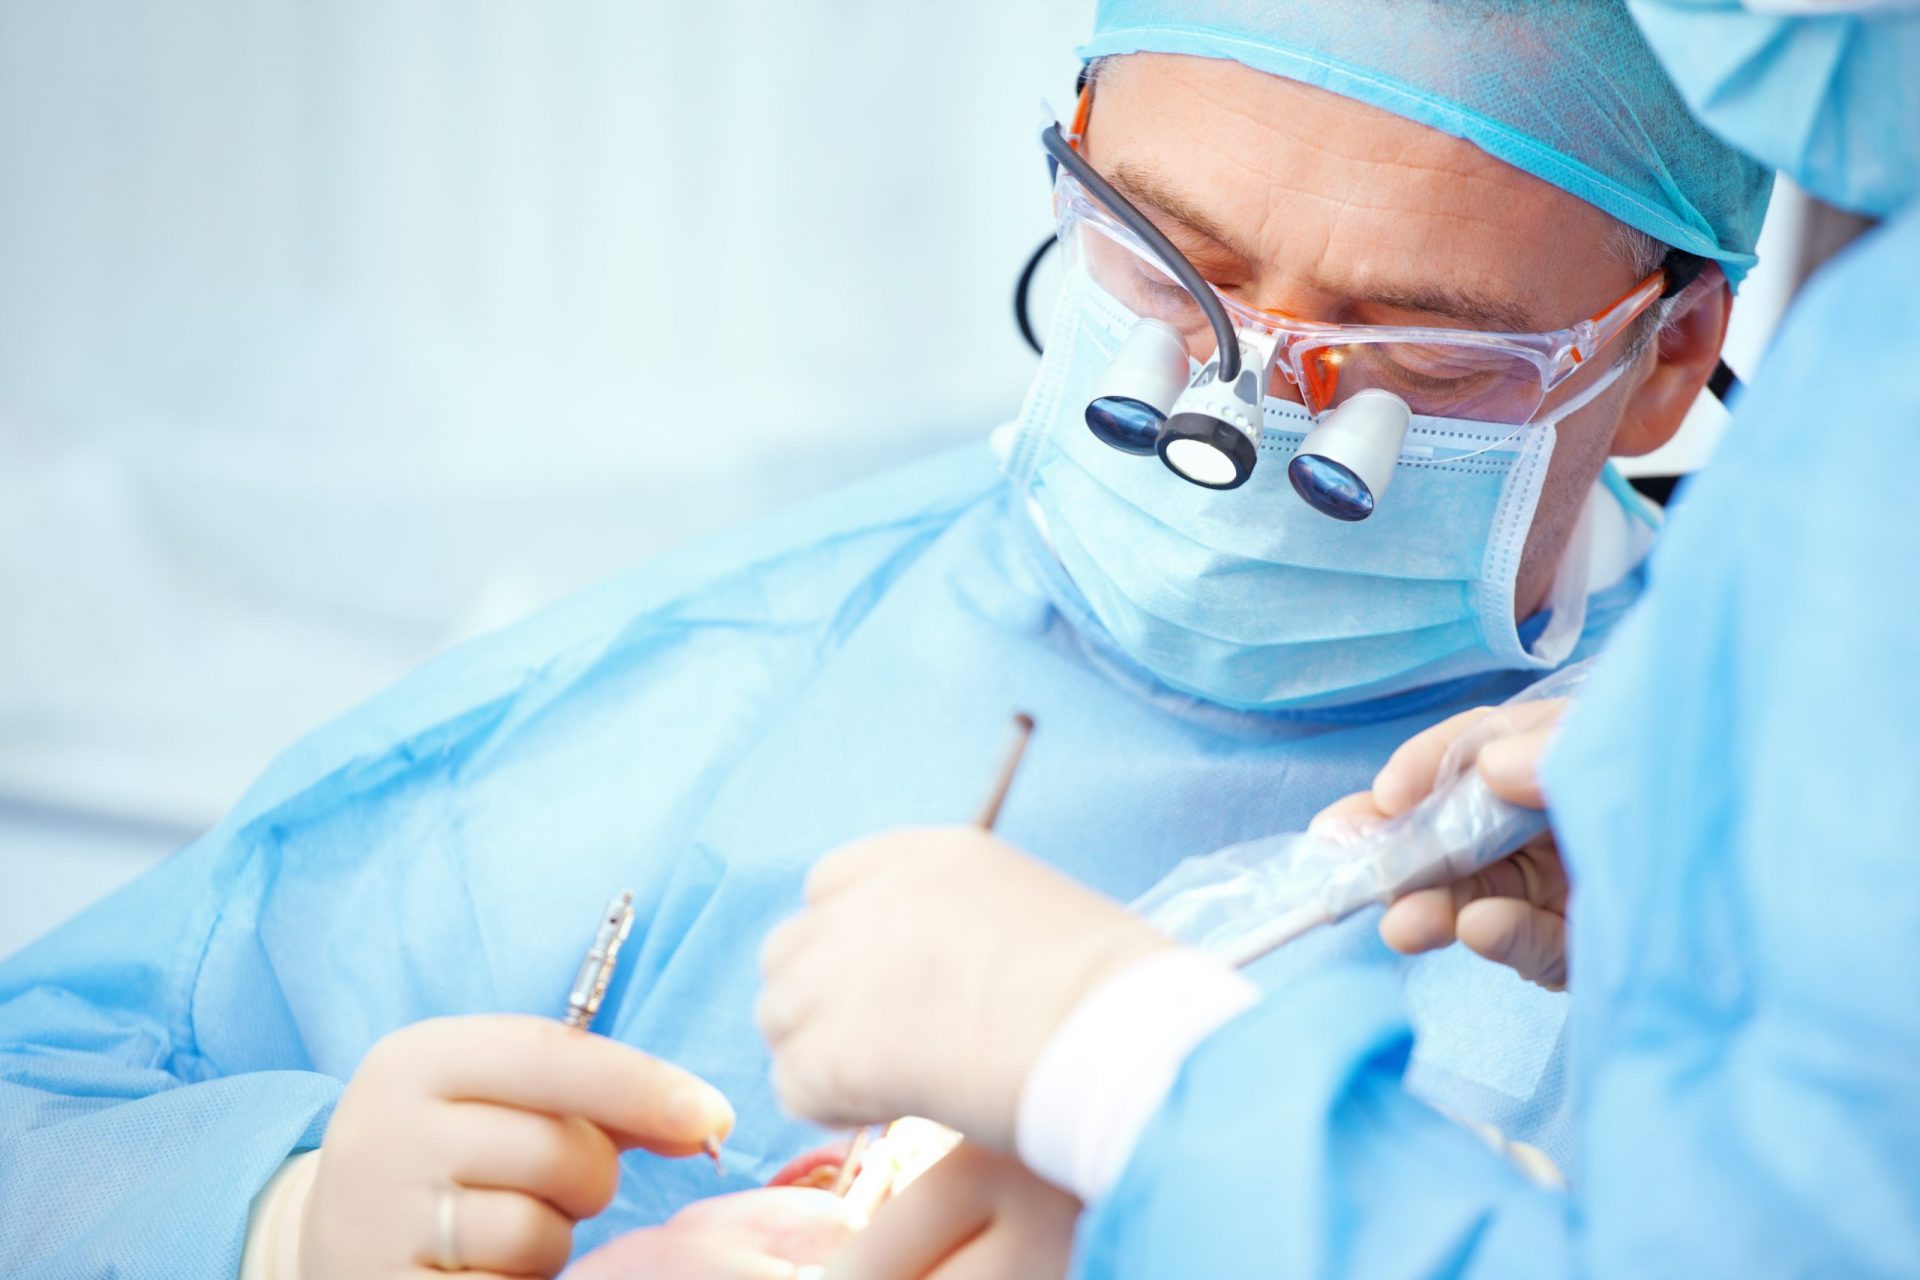 A periodontist operating on a patient.